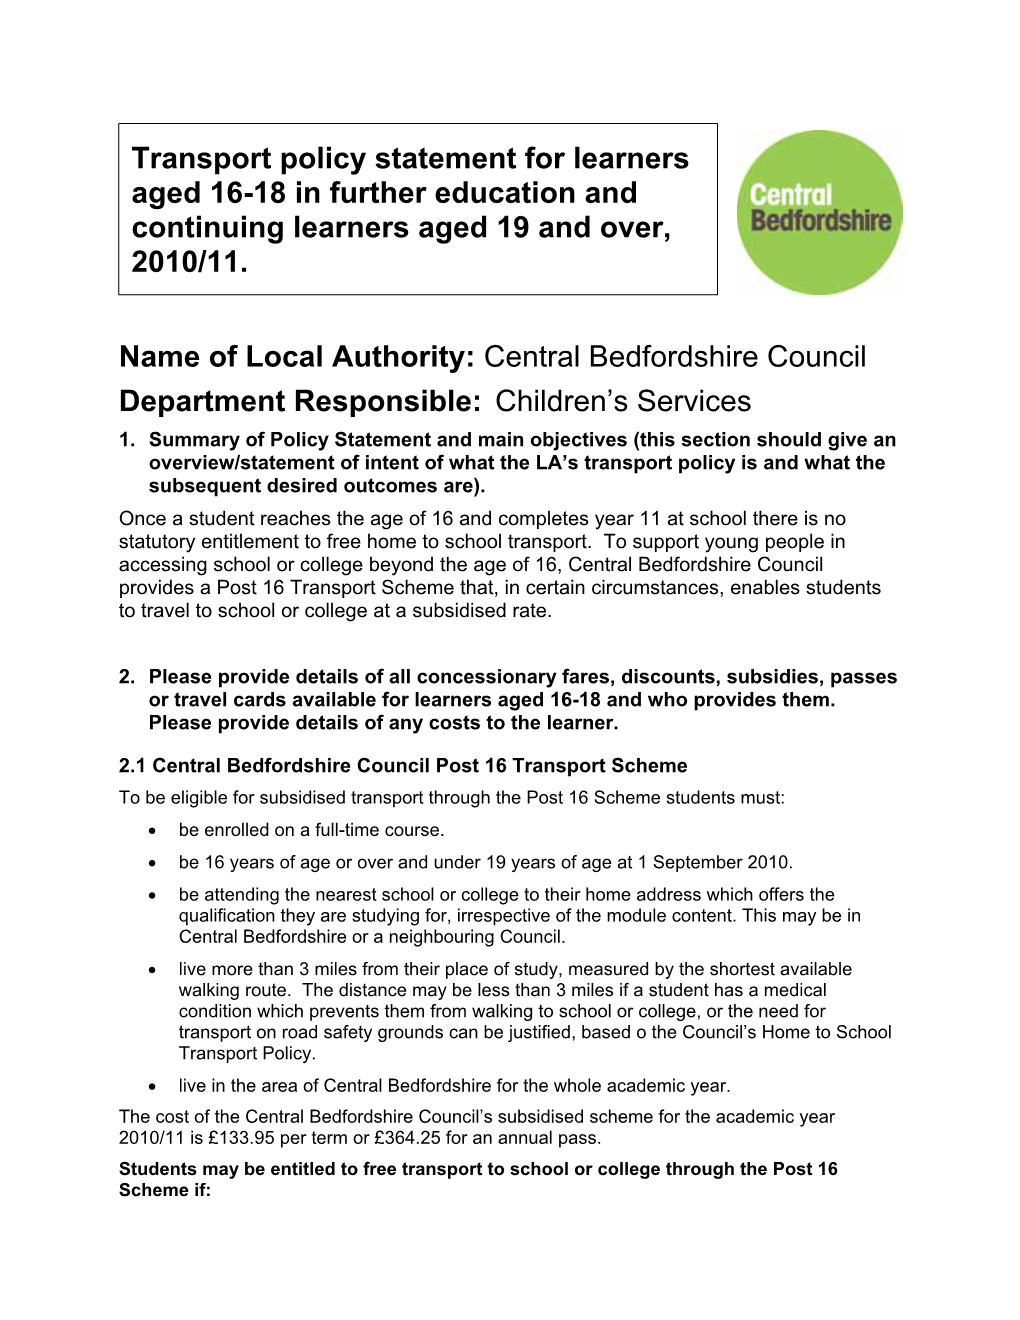 Transport Policy Statement for Learners Aged 16-18 in Further Education and Continuing Learners Aged 19 and Over, 2010/11